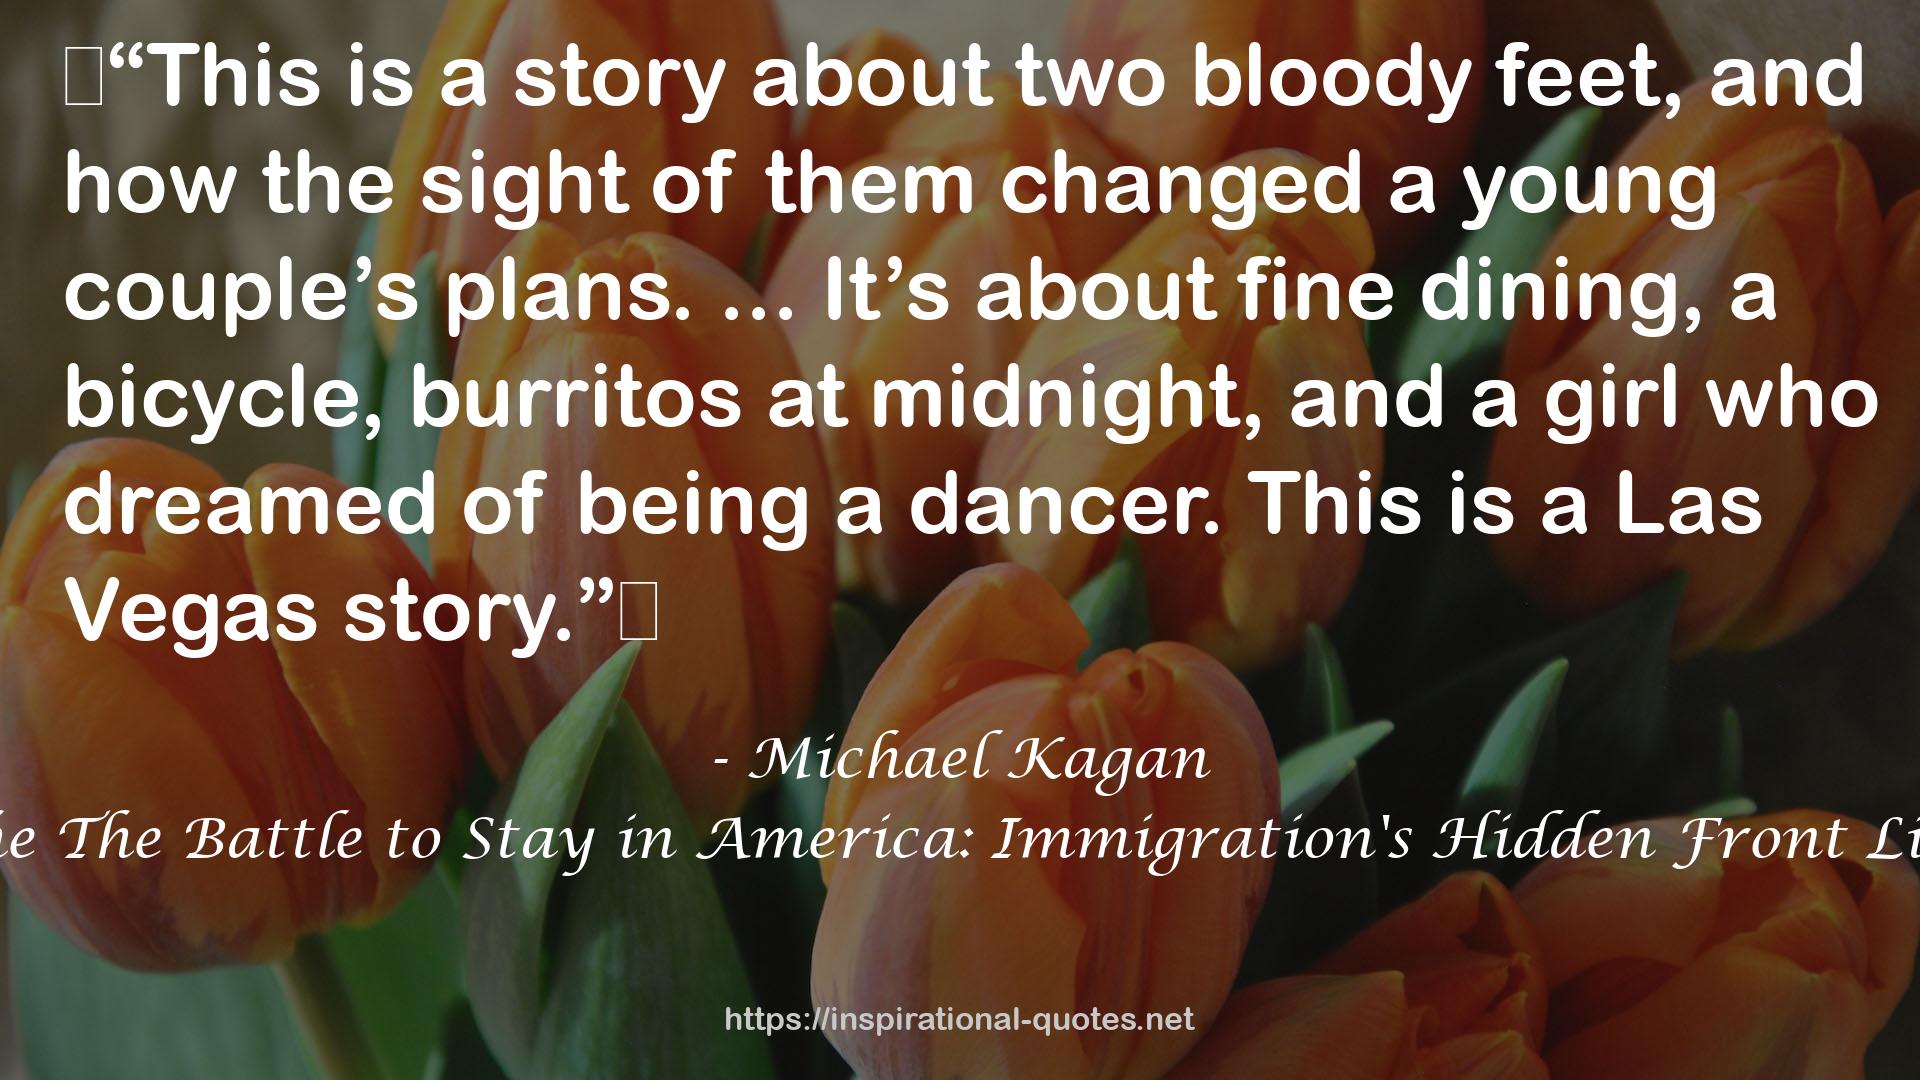 The The Battle to Stay in America: Immigration's Hidden Front Line QUOTES